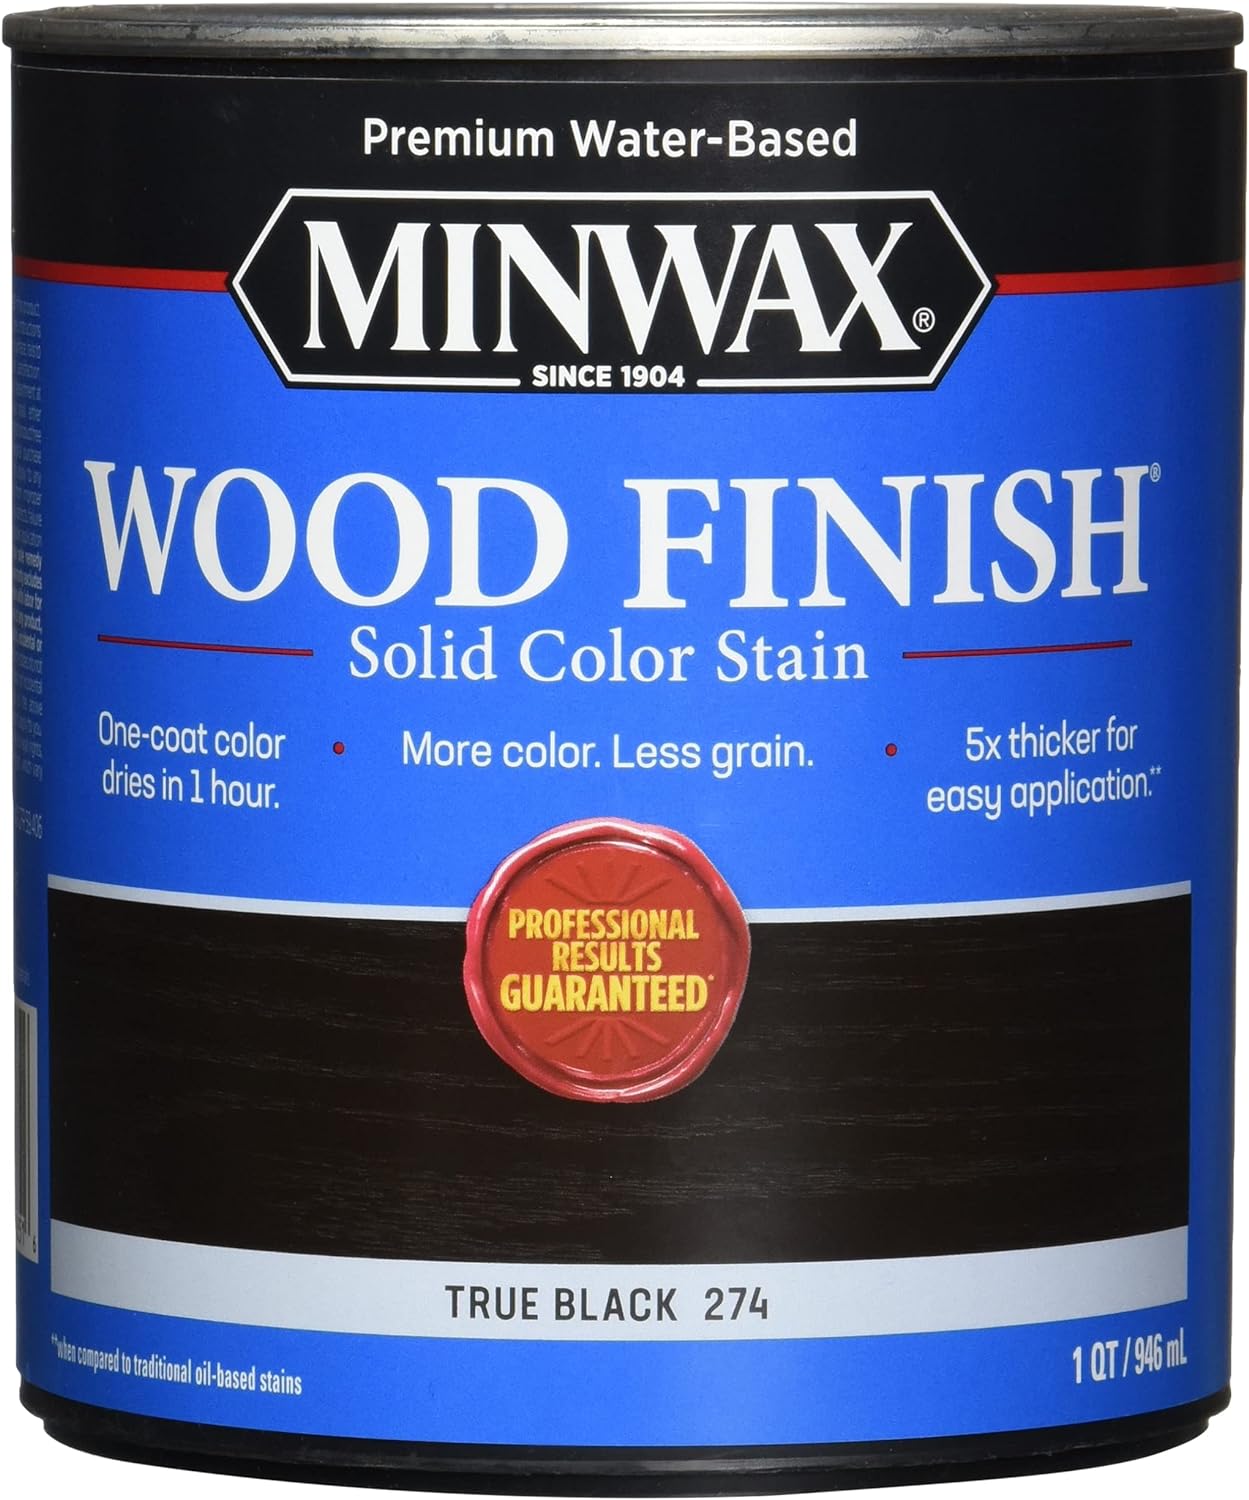 Minwax Wood Finish Water-Based Solid Color Stain